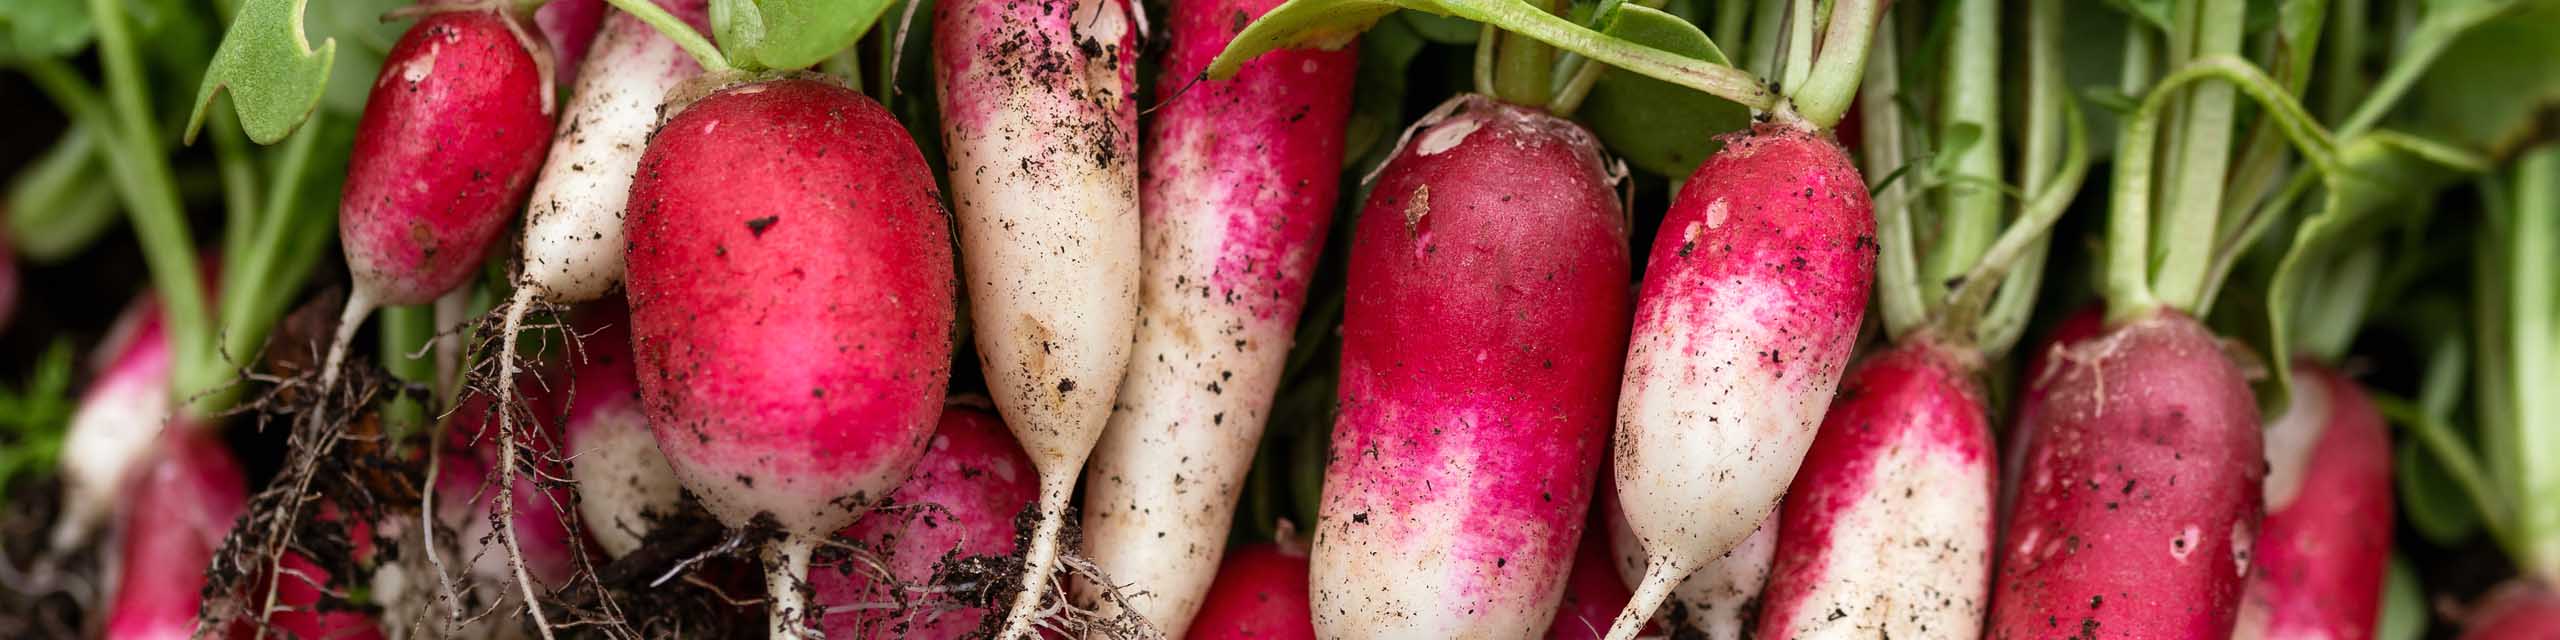 Freshly harvested French radishes laying in garden soil.